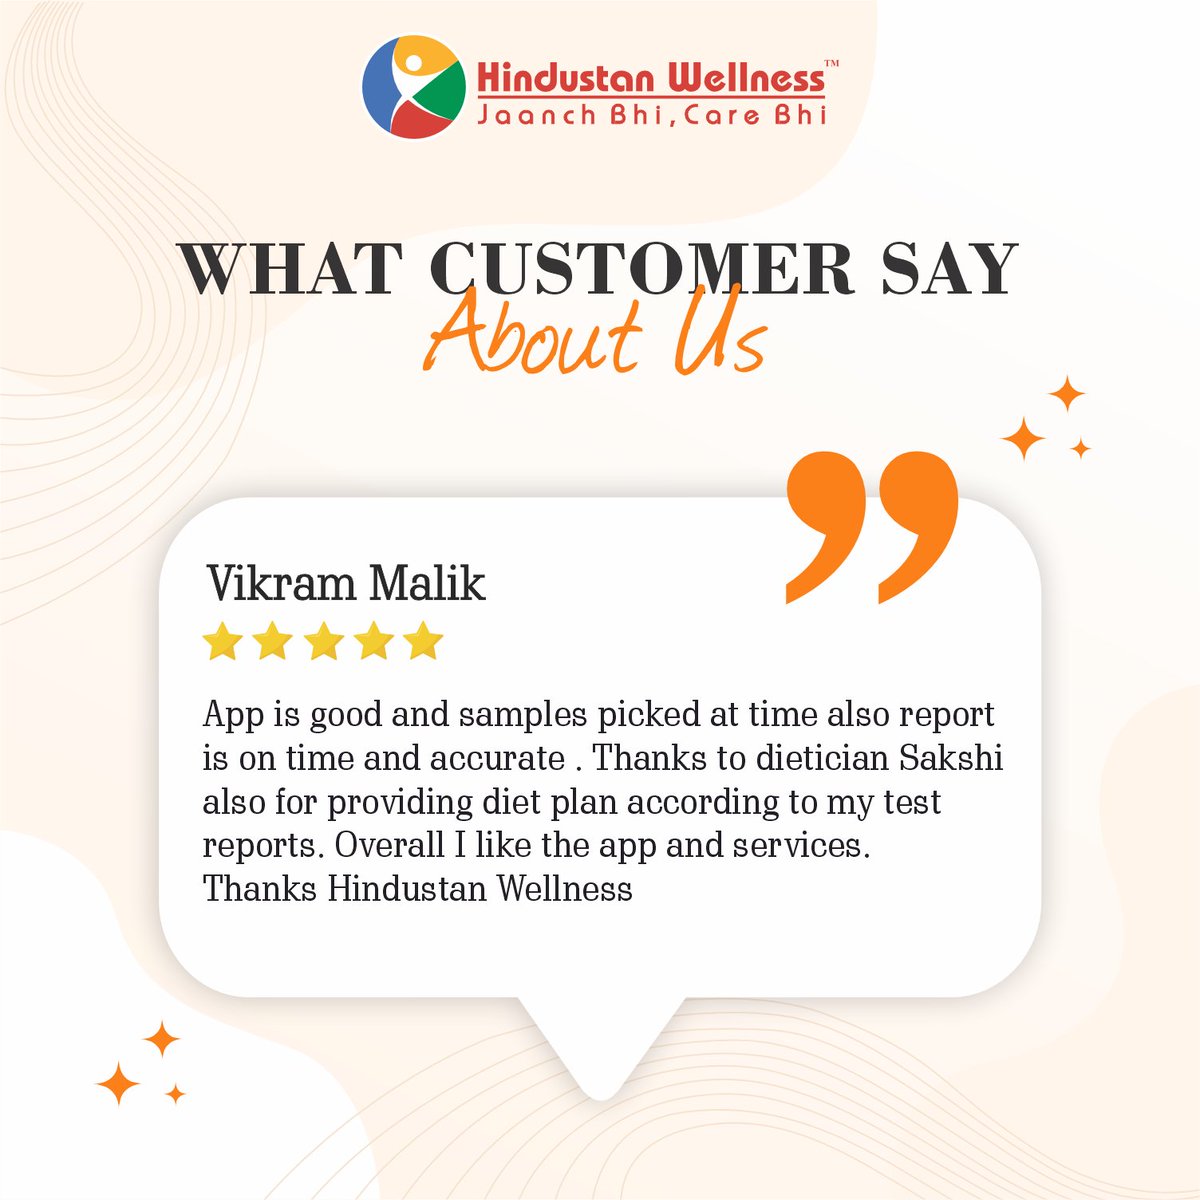 Feedback isn’t mere words but a reflection of satisfaction, one that can't be made-up. Thank you for the awesome feedback.

#happycustomer #happy #customerfeedback #googlereview #feedback #customerservice #customerreviews #jaanchbhicarebhi #healthcare #HindustanWellness